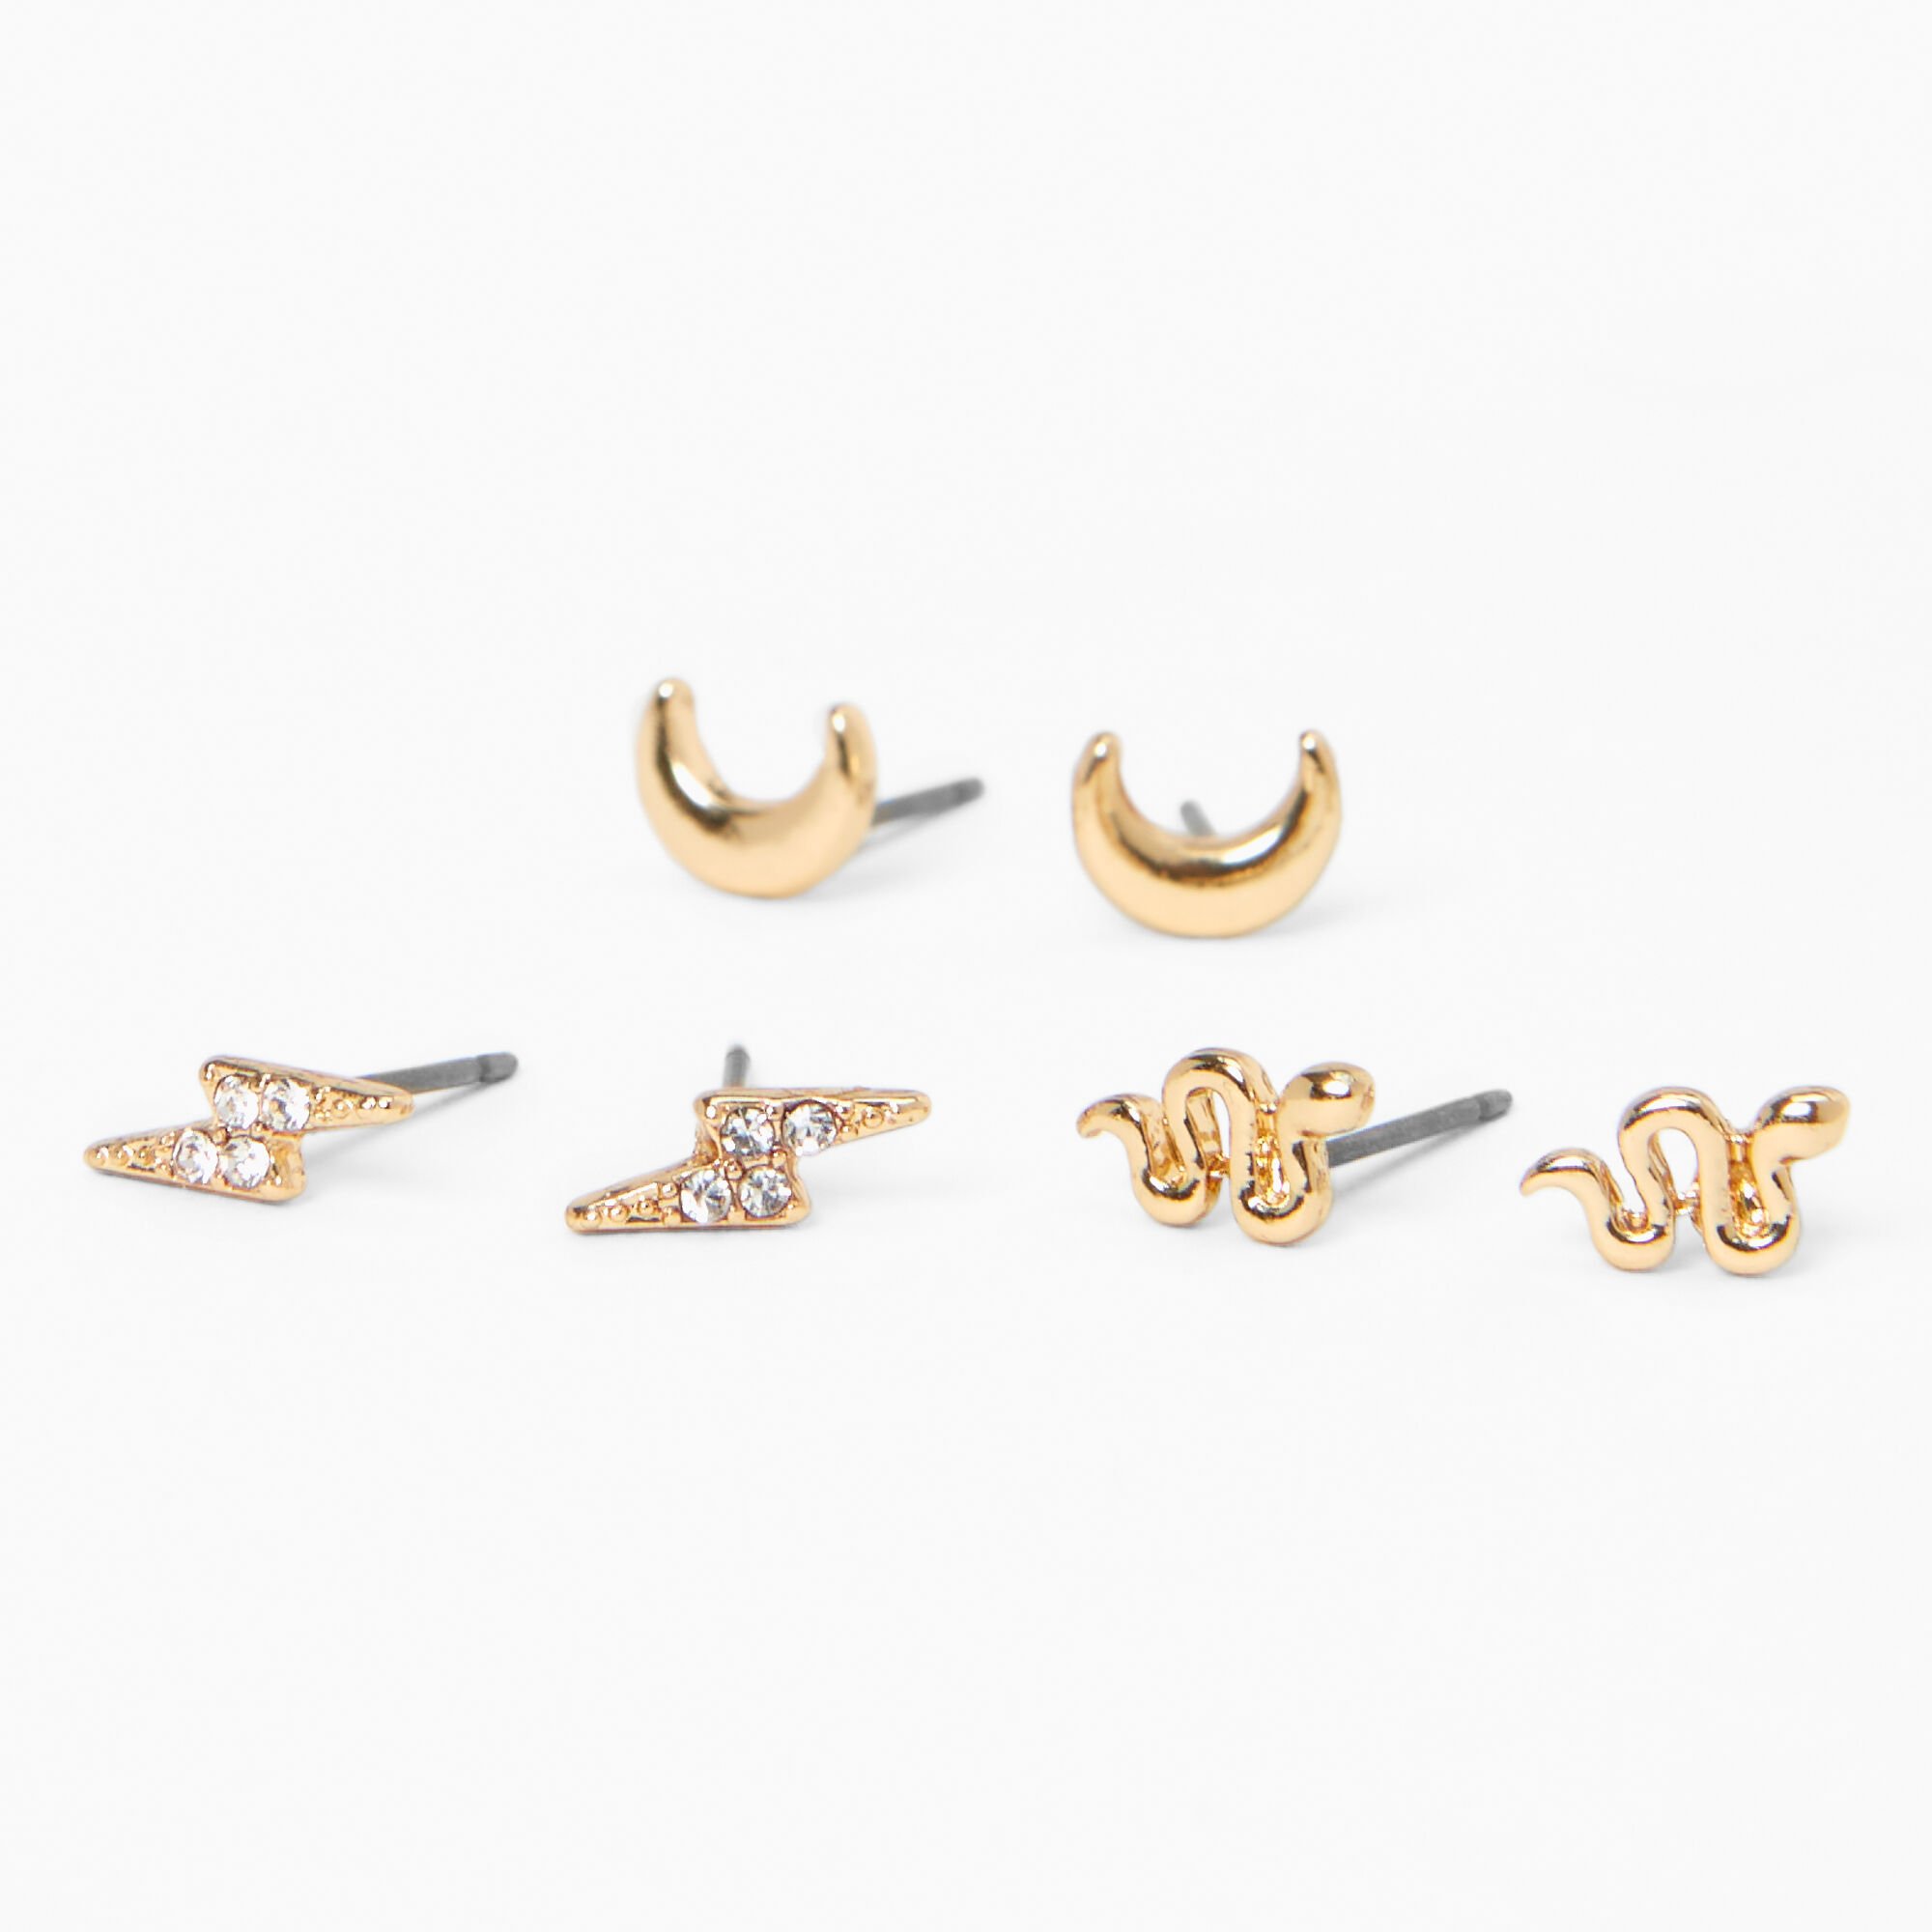 View Claires Tone Celestial Stud Earrings 3 Pack Gold information